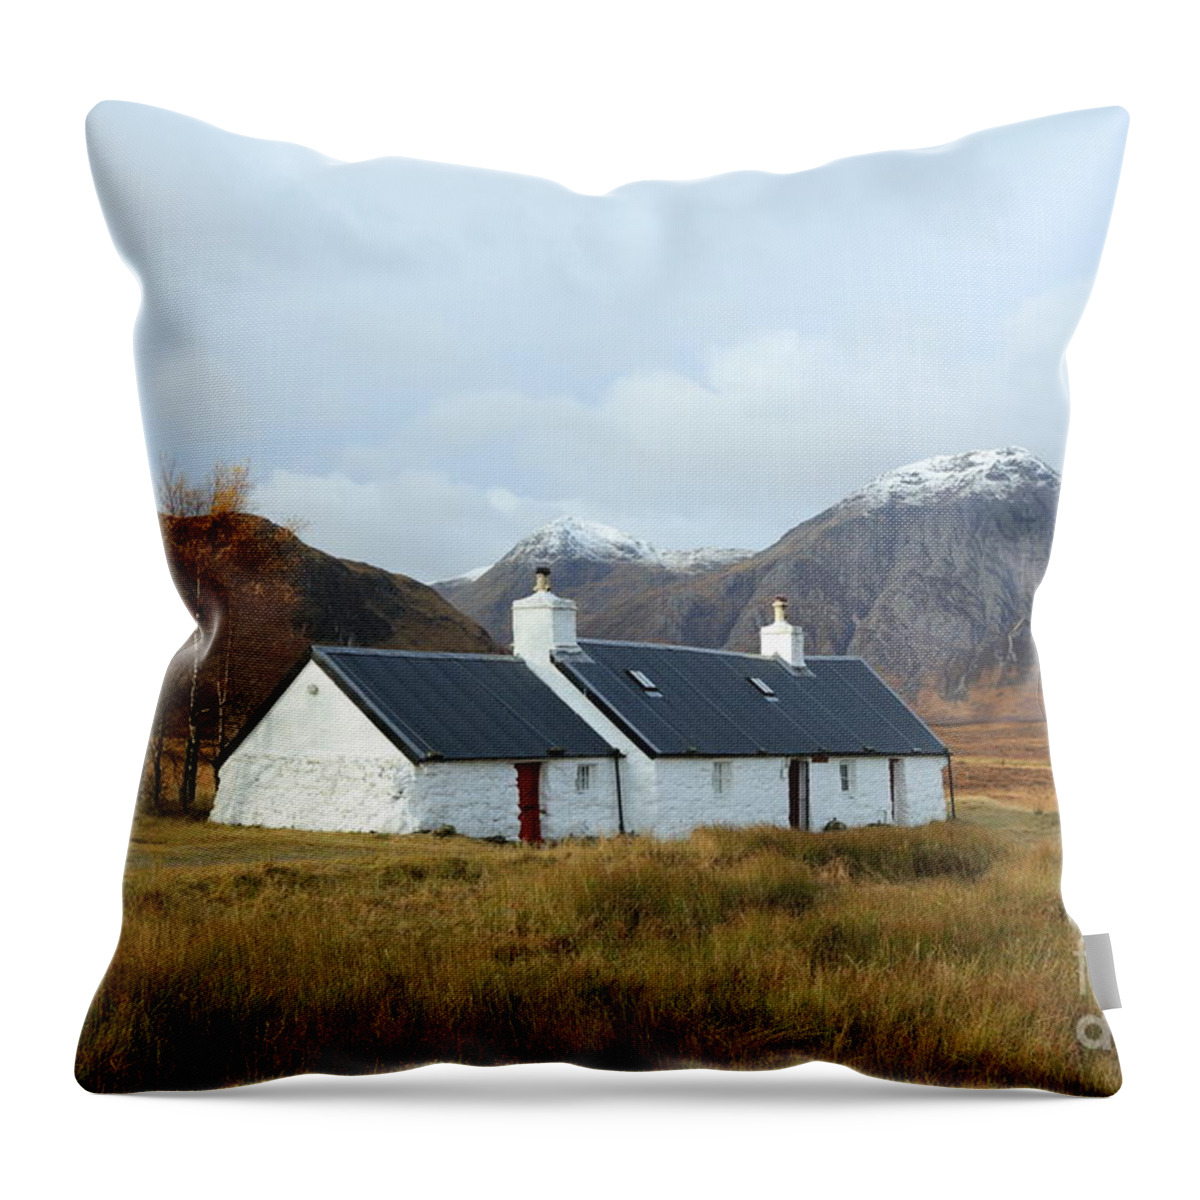 Black Rock Cottage Throw Pillow featuring the photograph Black Rock Cottage by Maria Gaellman